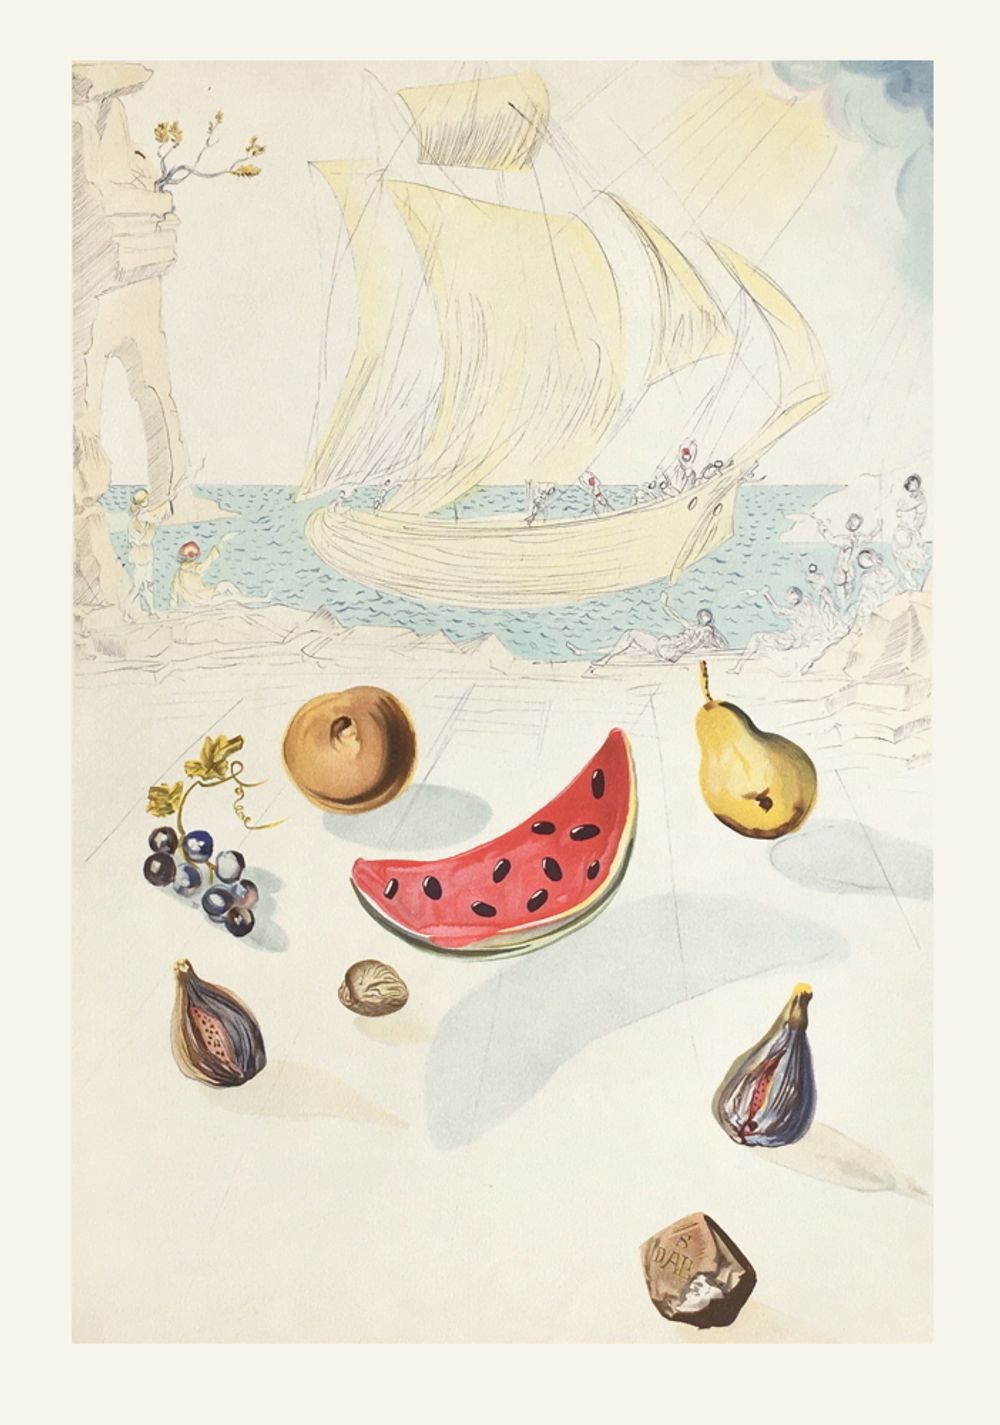 Ship and fruits